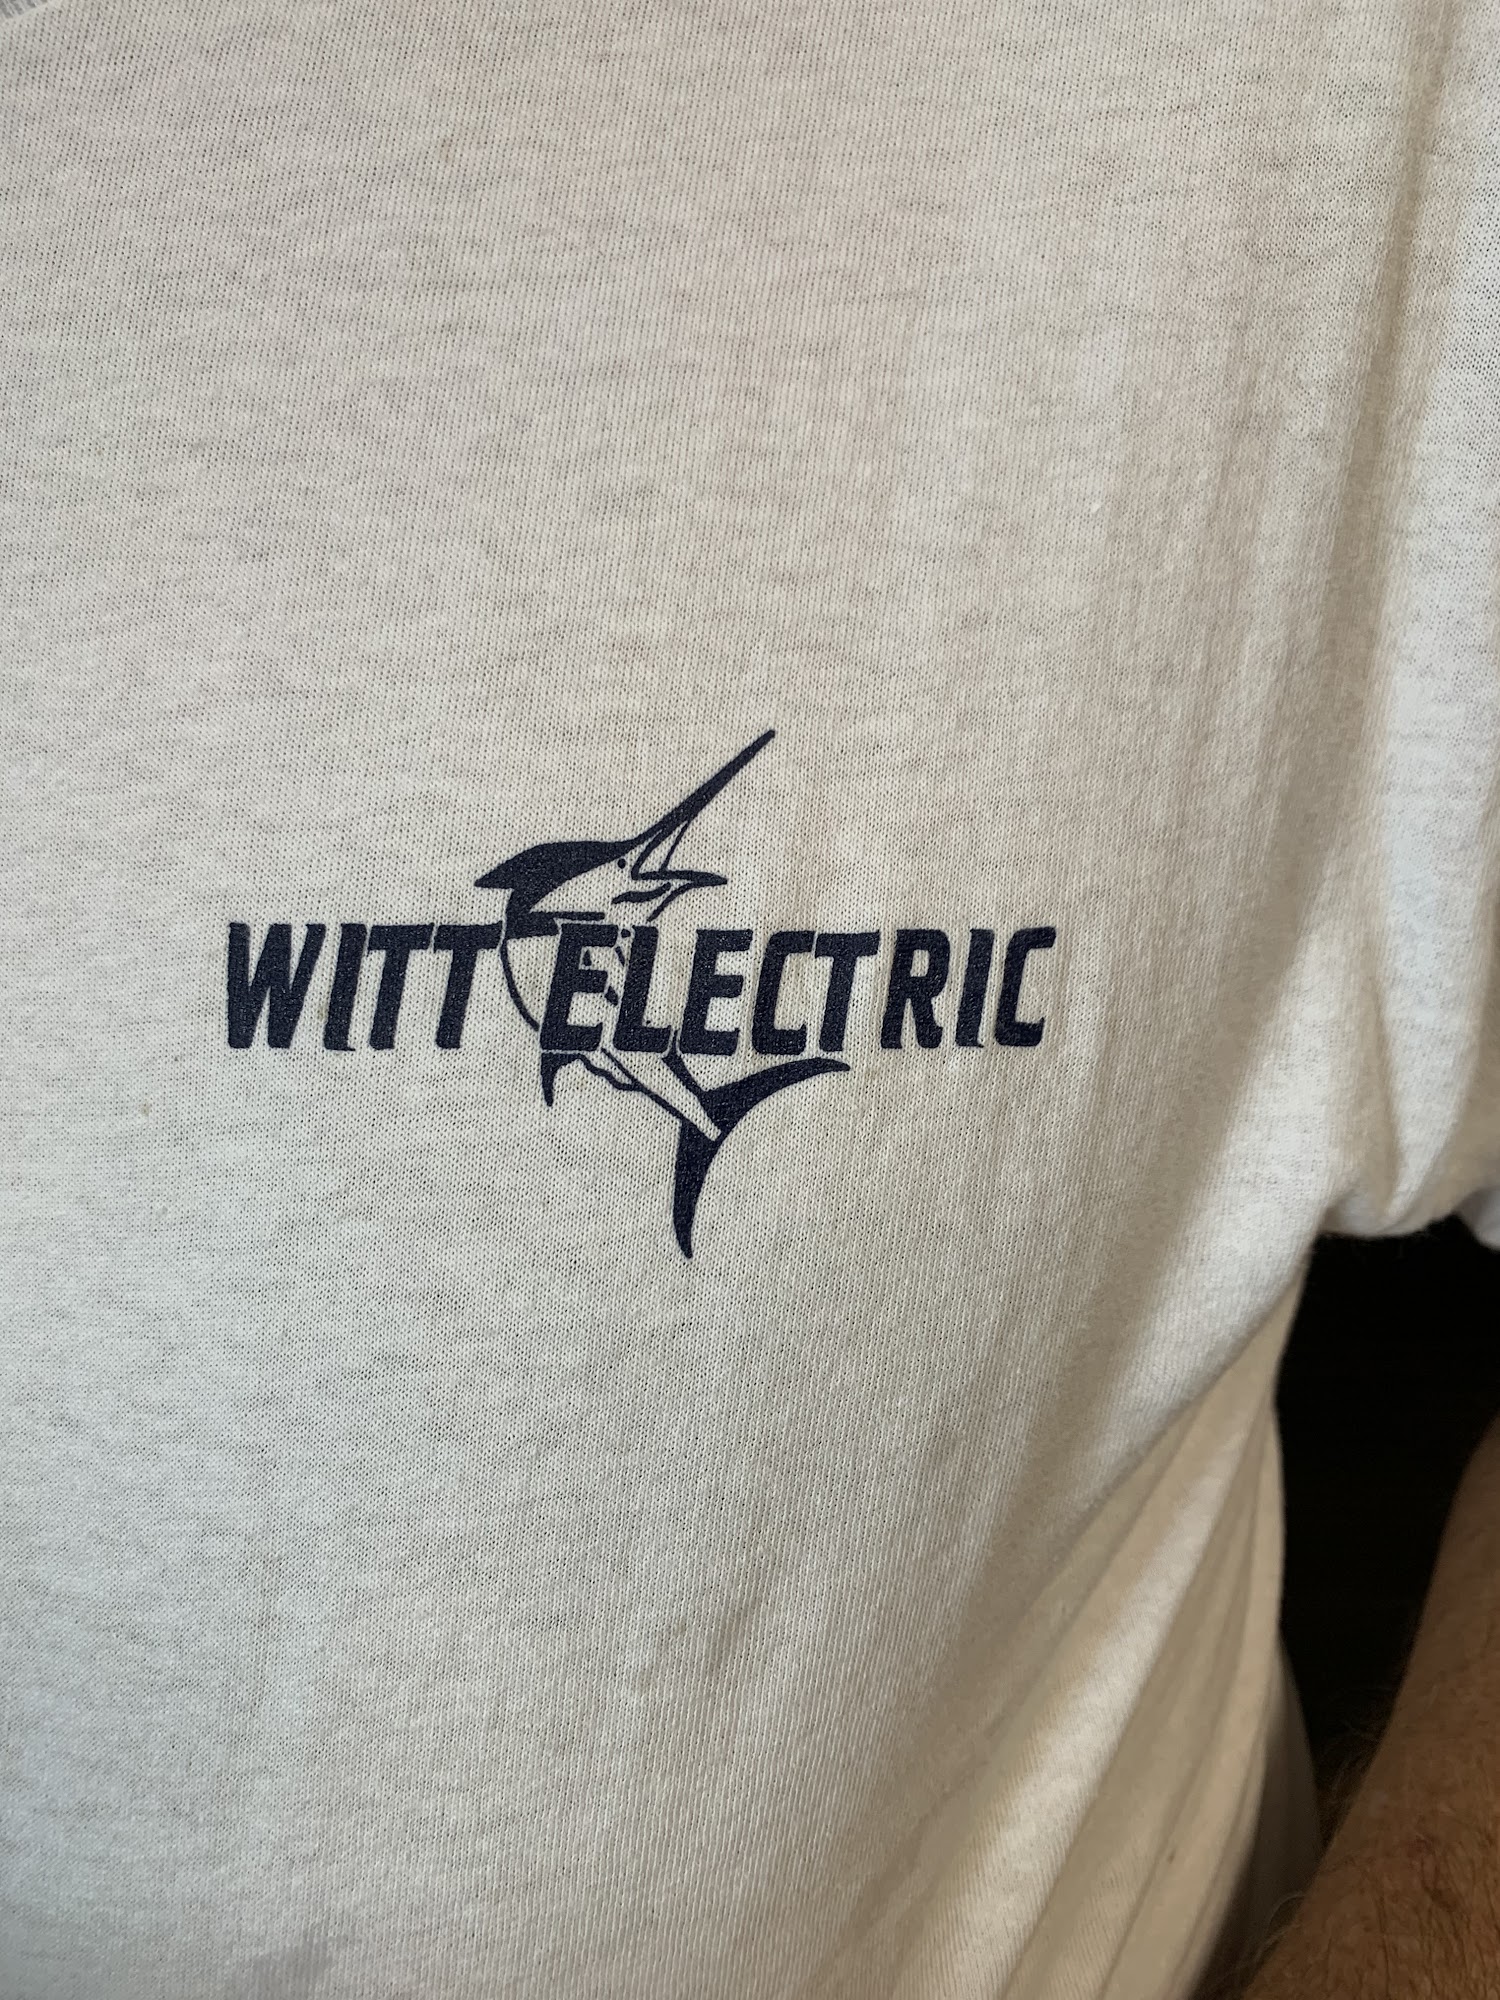 Witt Electric Co 1953 Witts End Ln, Hayes Virginia 23072